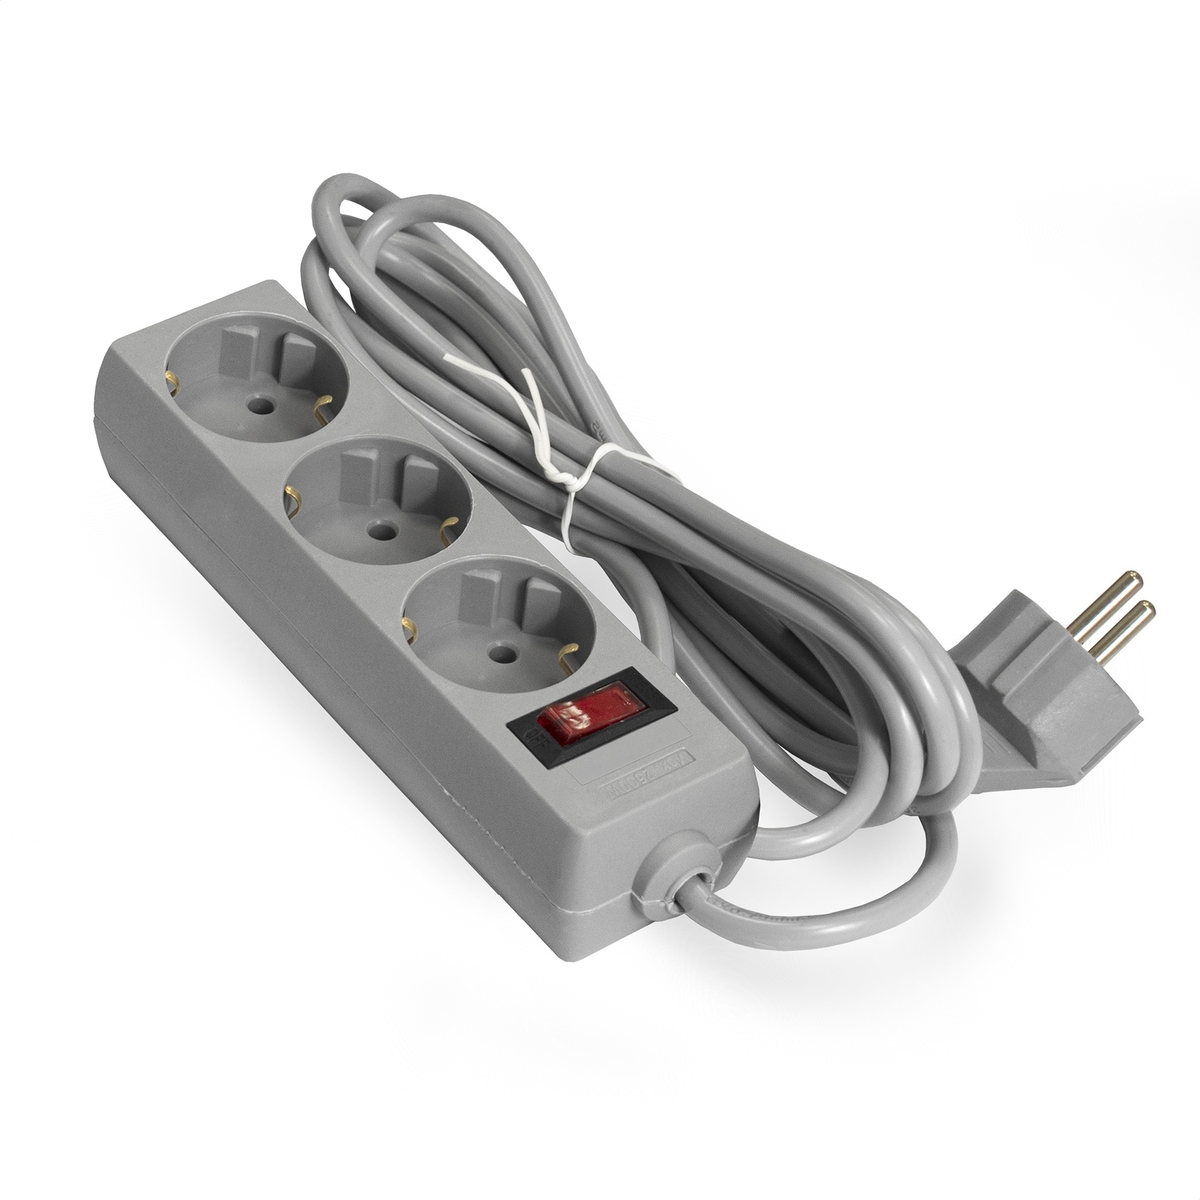 Surge protector ExeGate SP-3-1.8G